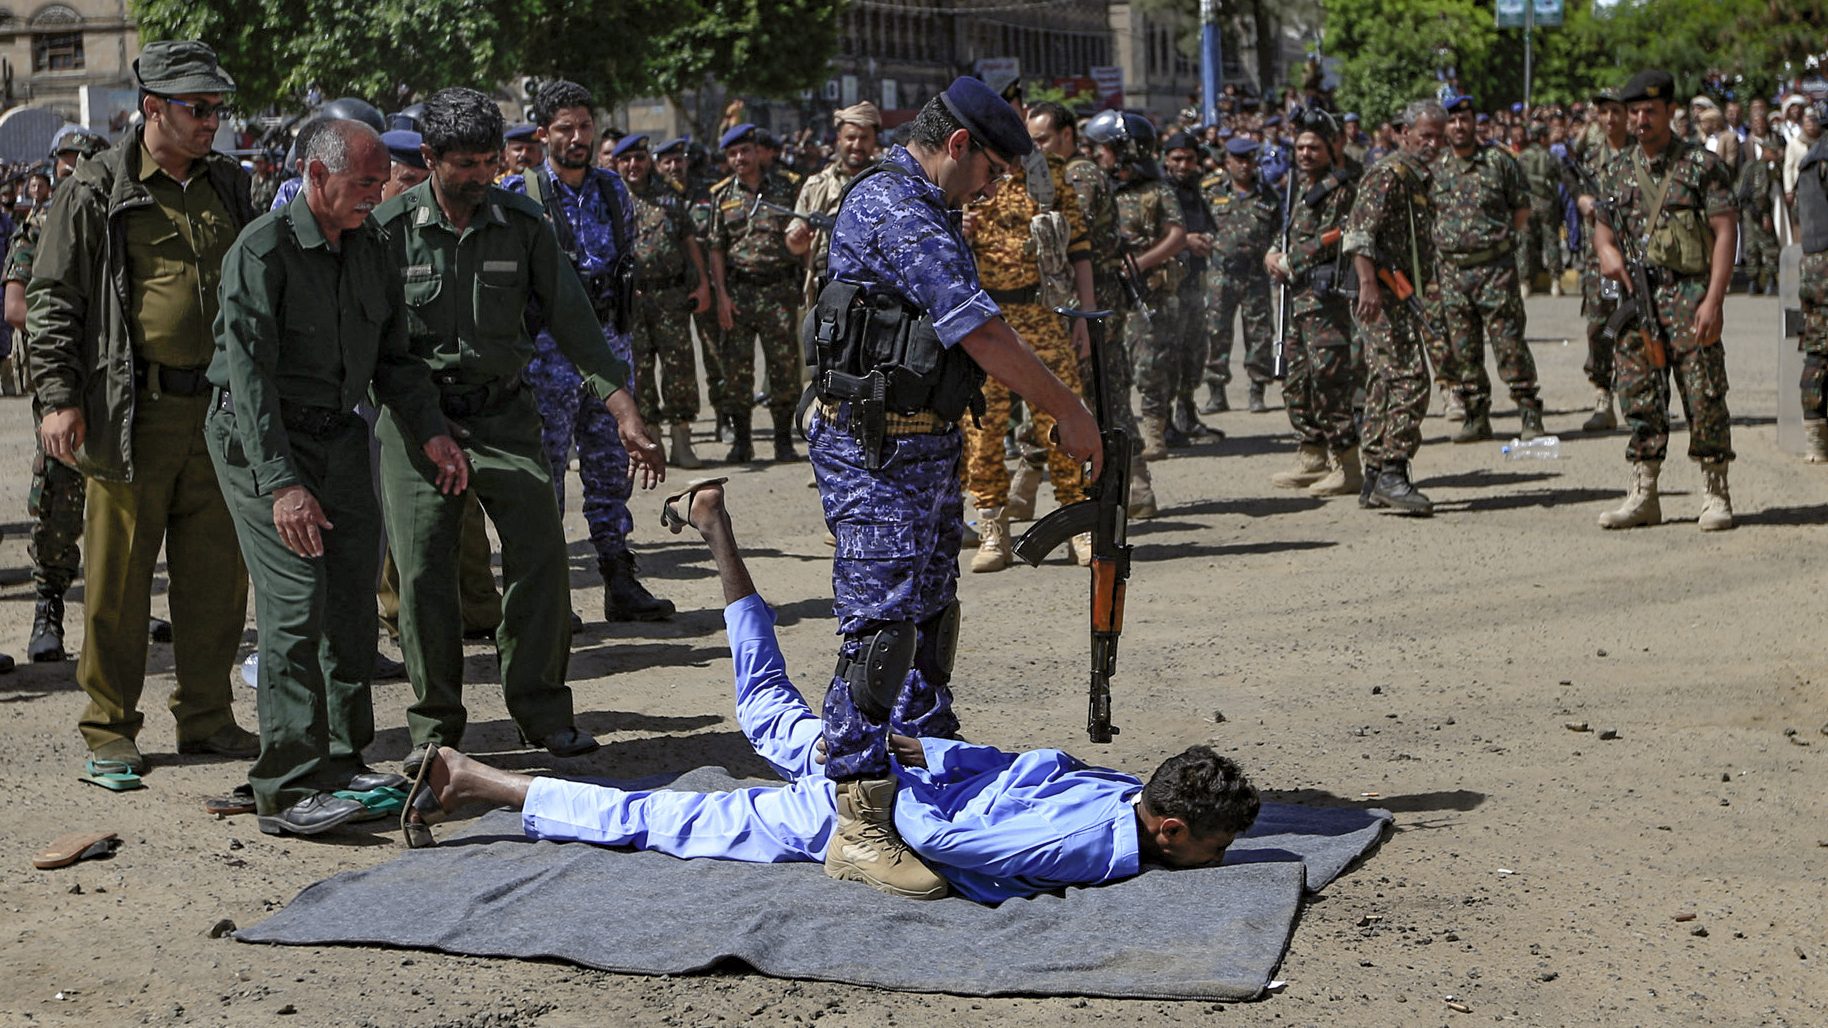 A member of the Yemeni security
forces prepares to execute a man convicted of collaborating with
Saudi Arabia in the assassination of Huthi political leader Saleh al-Sammad. Photo: Mohammed Huwais/AFP